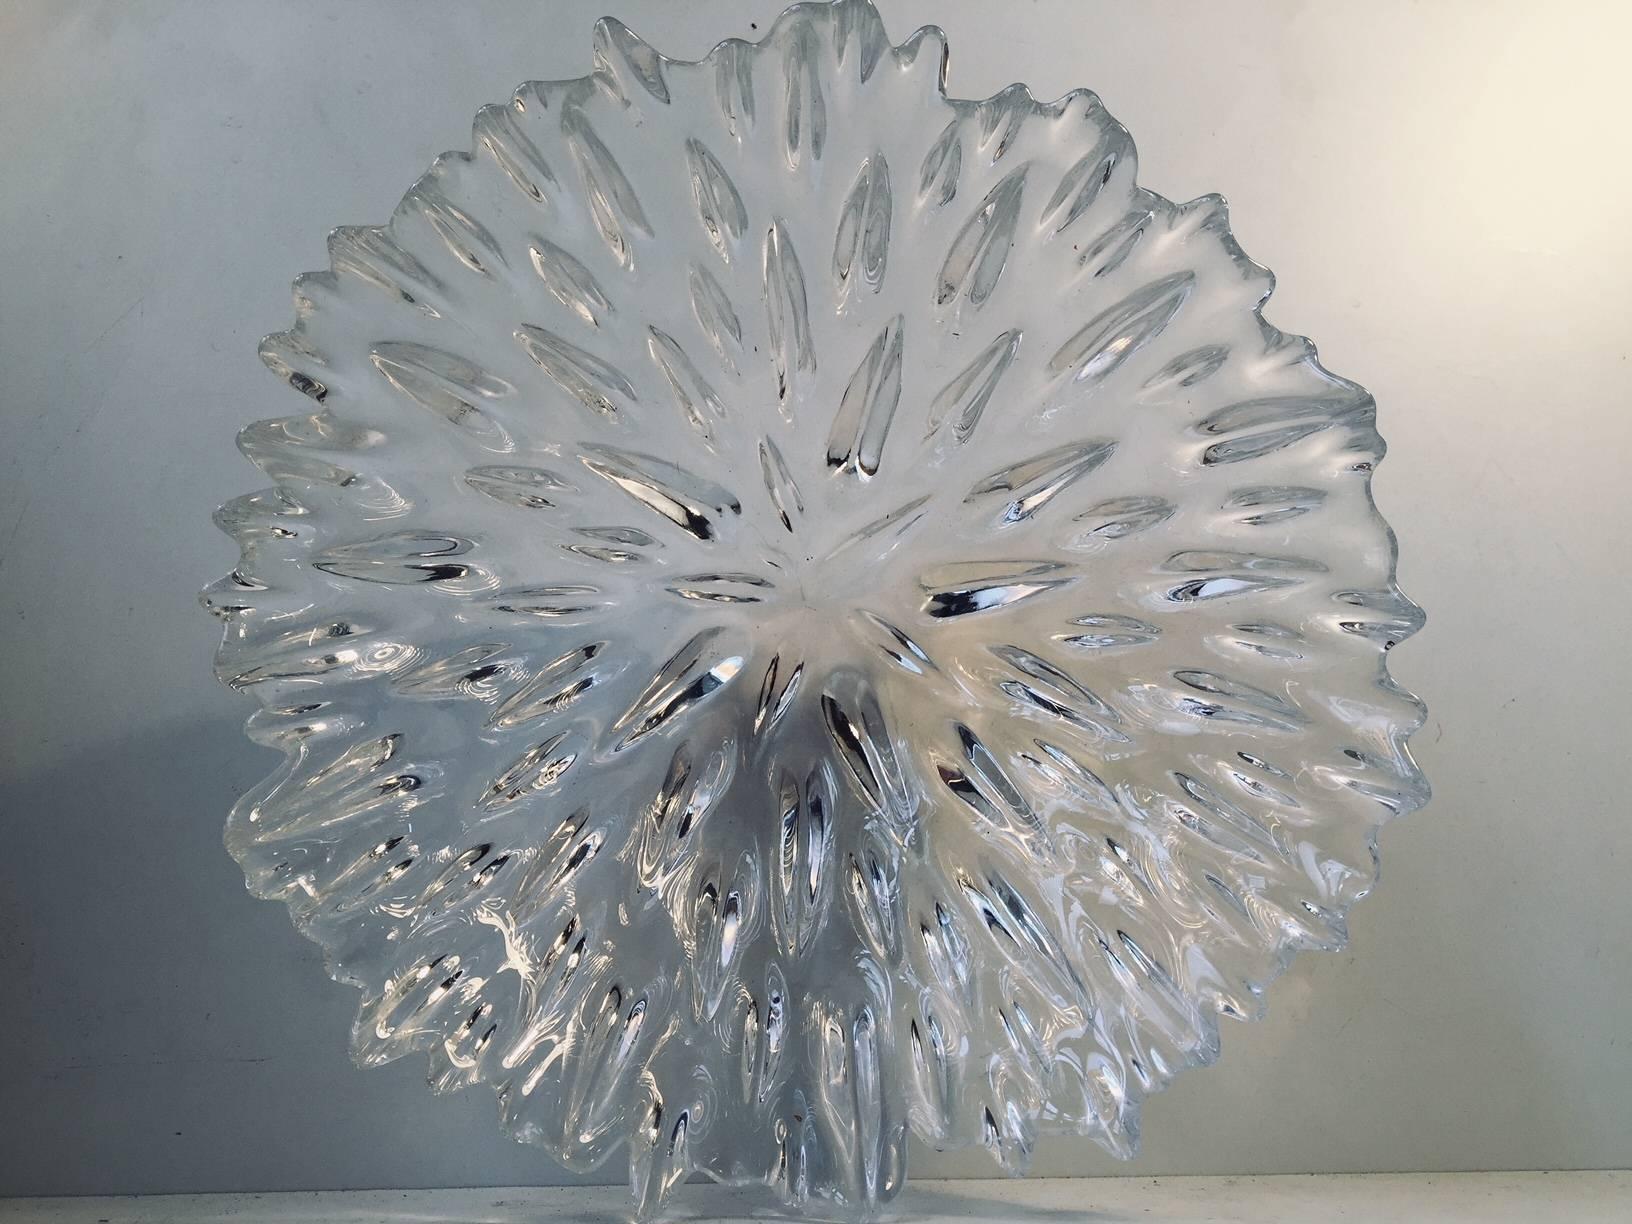 Budded crystal bowl designed by Per Lütken in the 1970s and manufactured by Royal Copenhagen in 1991. The bowl is heavy and weighs in around 1.5 kg. Stylistically the design borderlines between Axel Salto and Tapio Wirkkala's organic and biomorphic